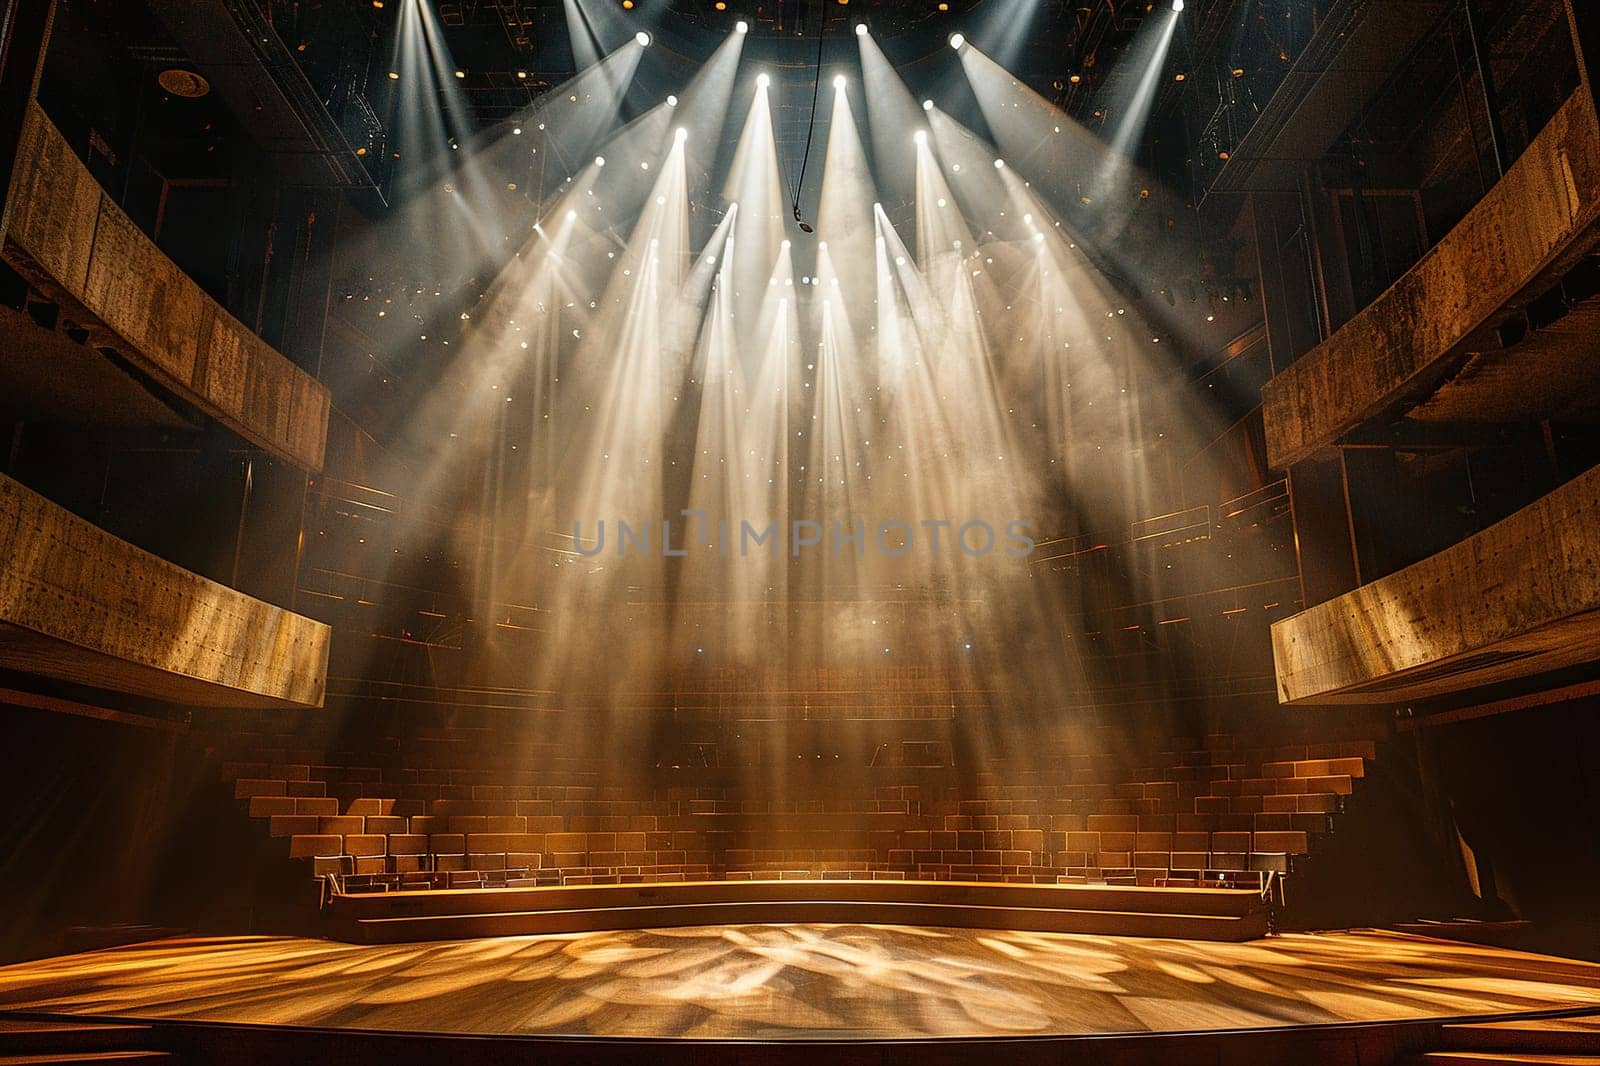 Image of the stage of an empty elegant classical theater with bright spotlights and seating.